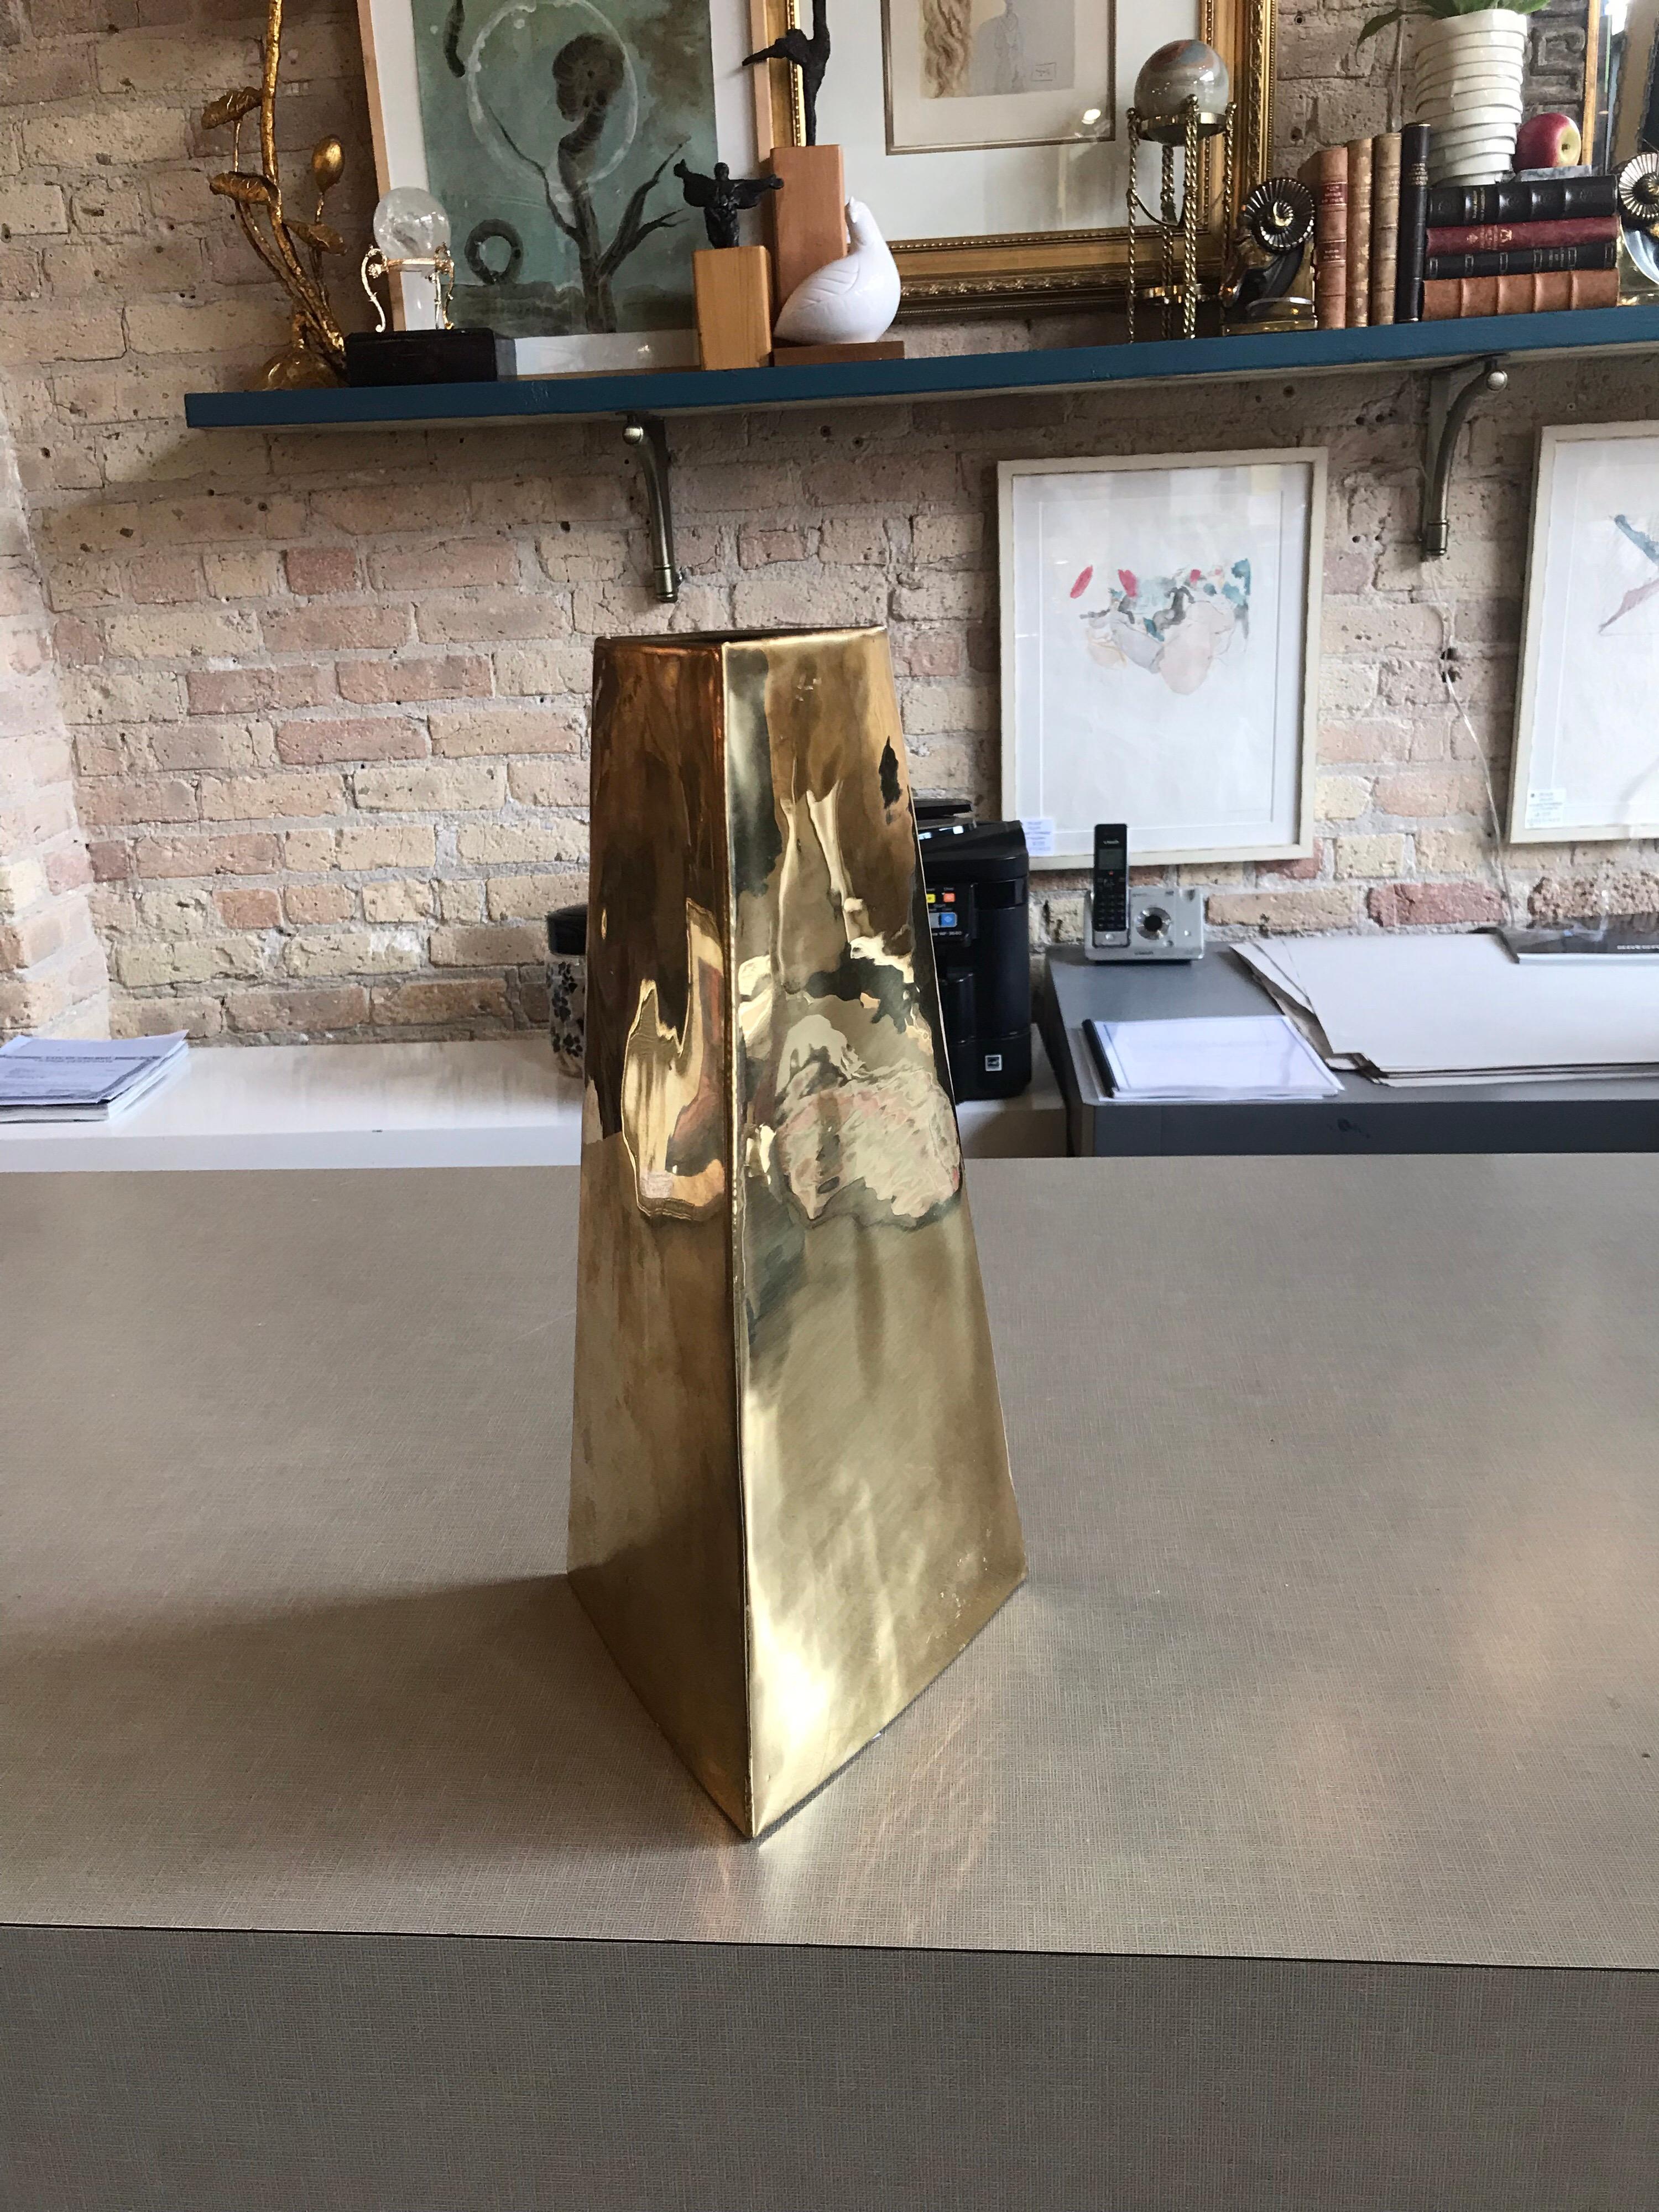 This is a brass triangular shaped tall vase designed by James Johnston and signed on bottom. It has a modern feel that would complement most any room